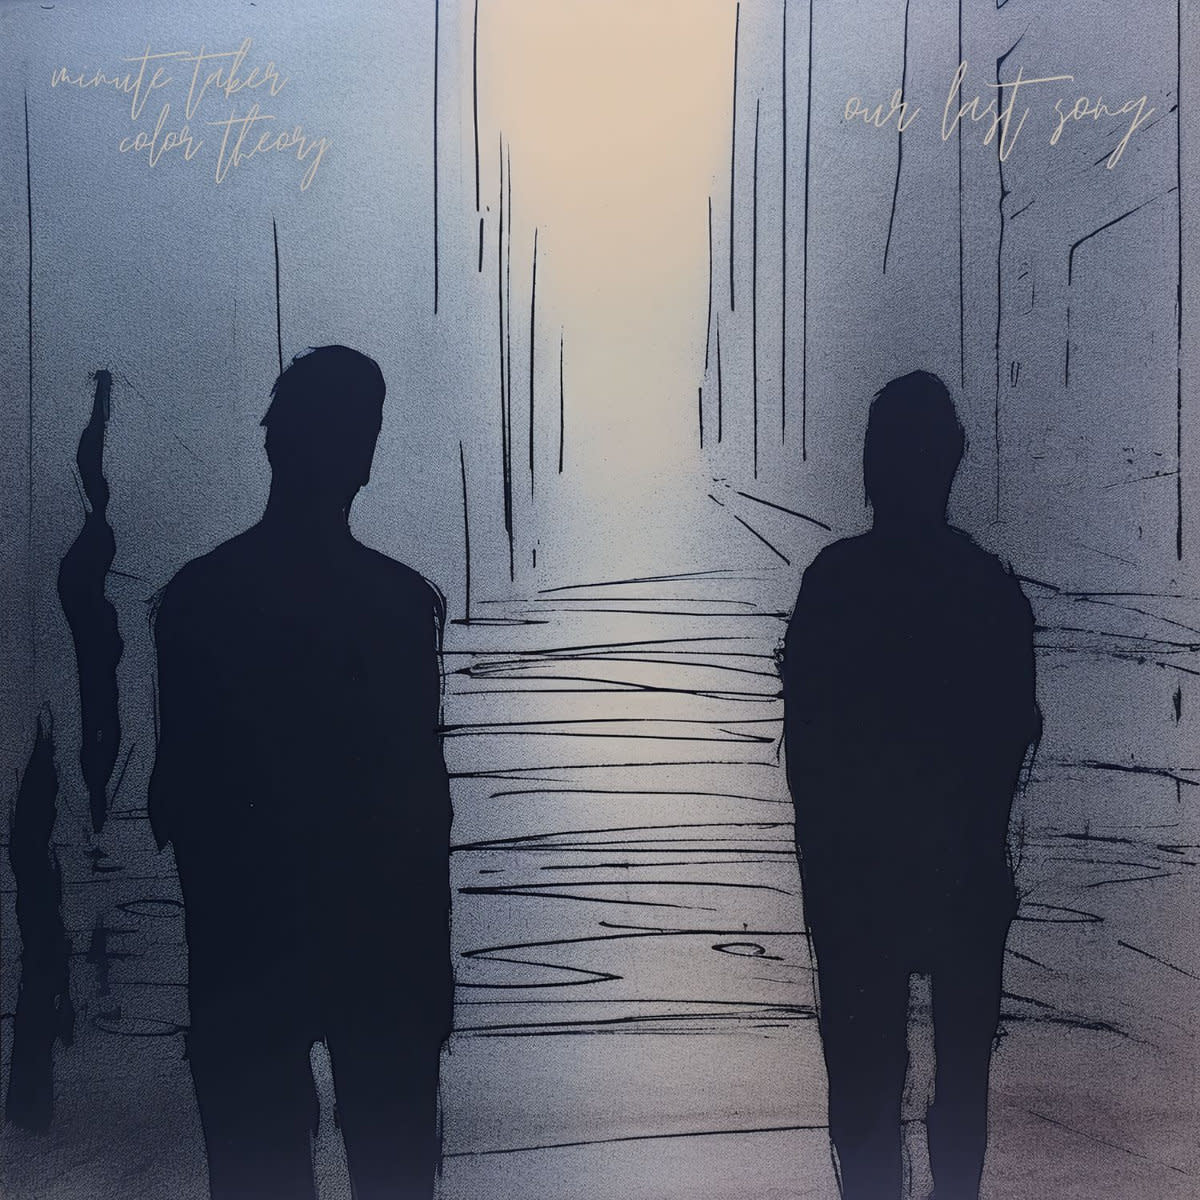 Synth EP Review: “Our Last Song’’ by Minute Taker & Color Theory